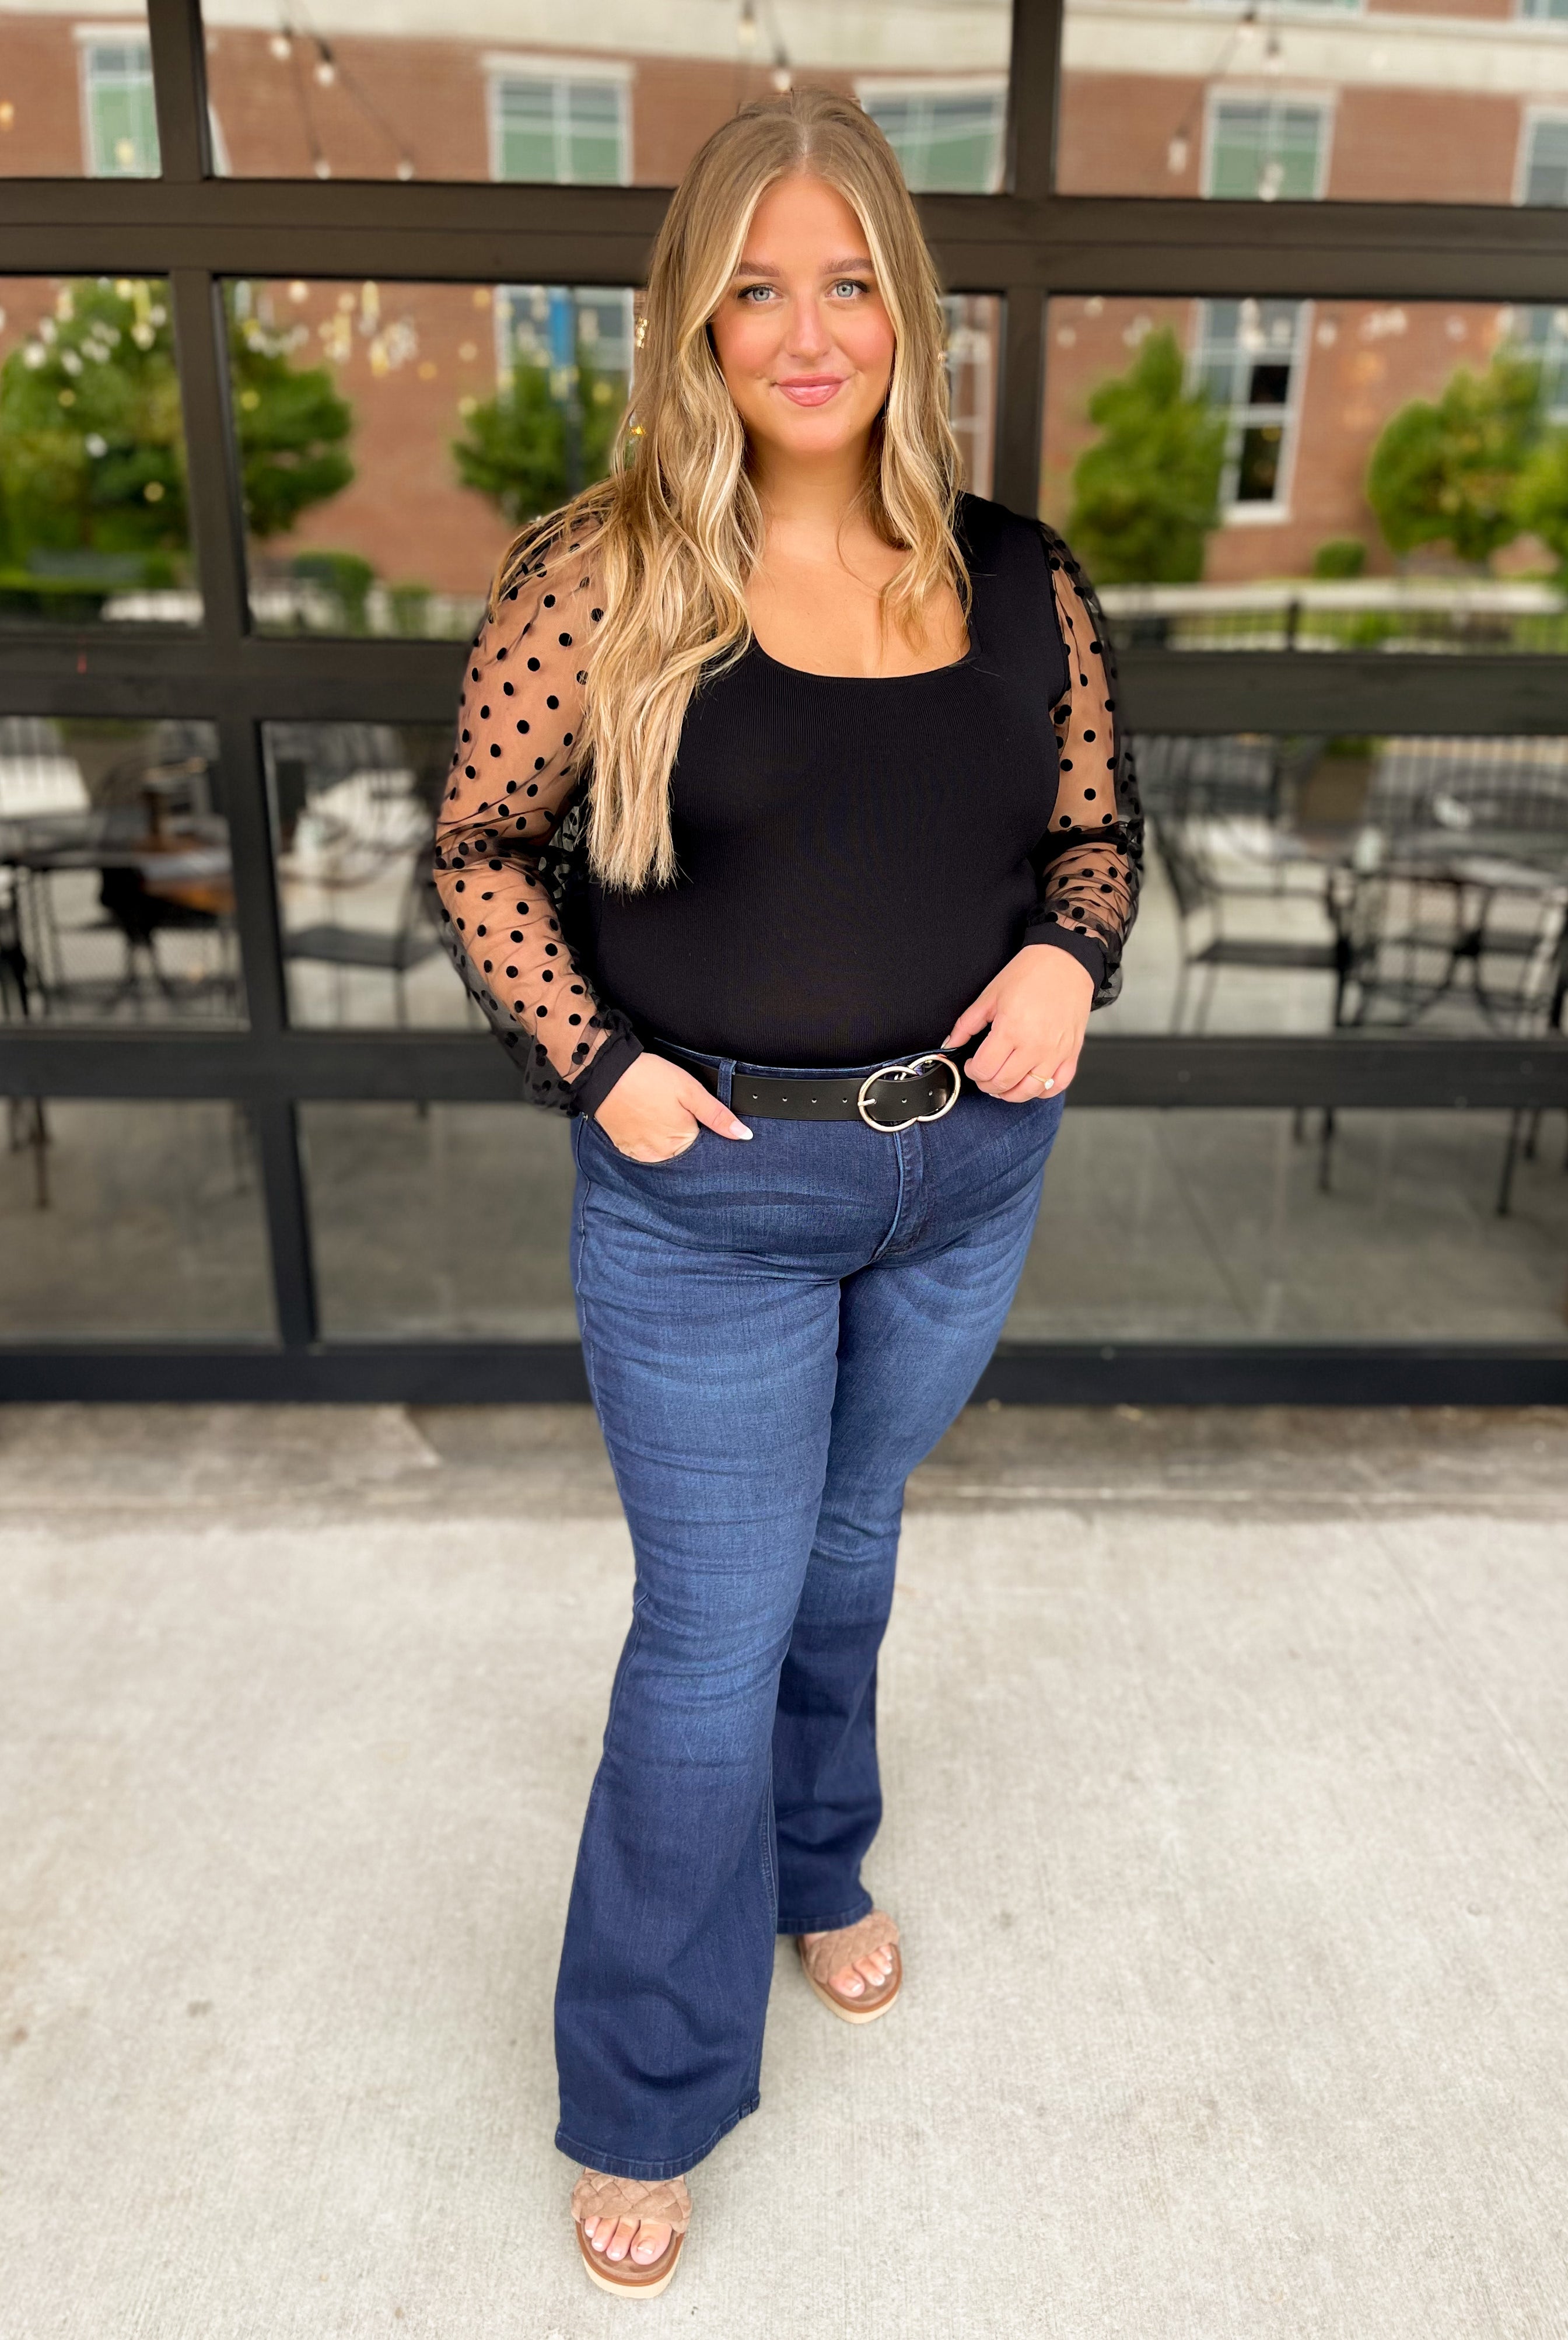 Marie Polka Dot Mesh Sleeve Top - Be You Boutique